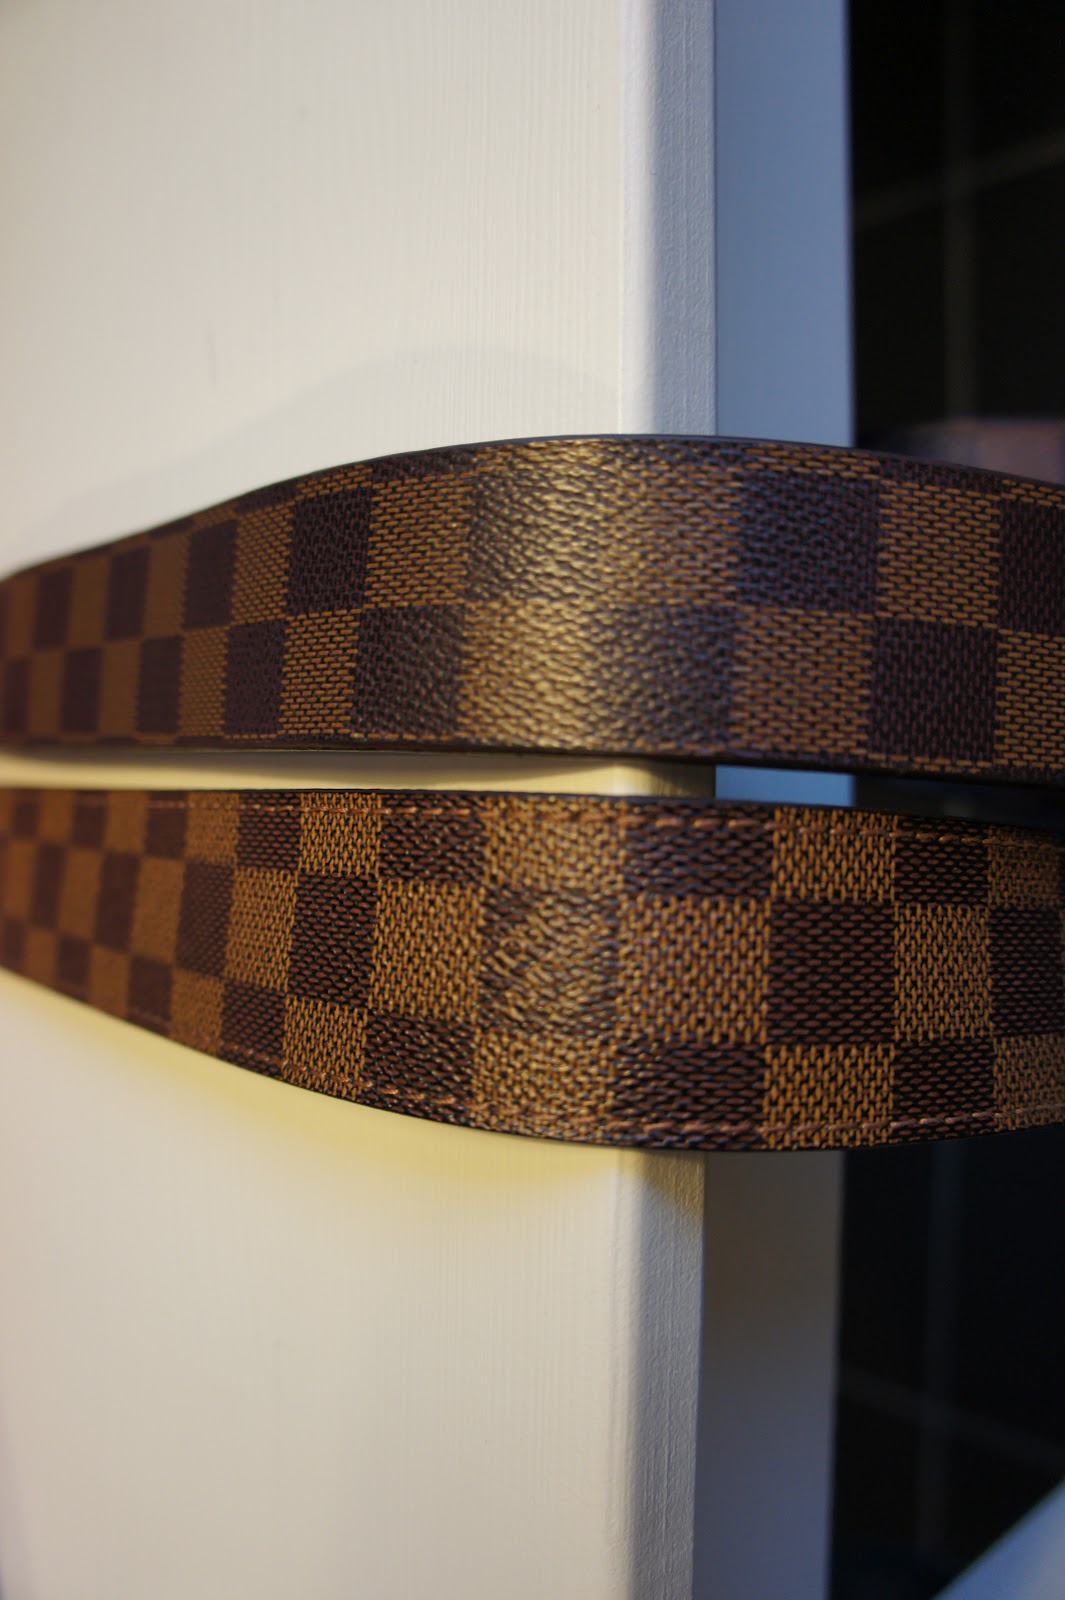 How Do I Know If My Louis Vuitton Belt Is Real